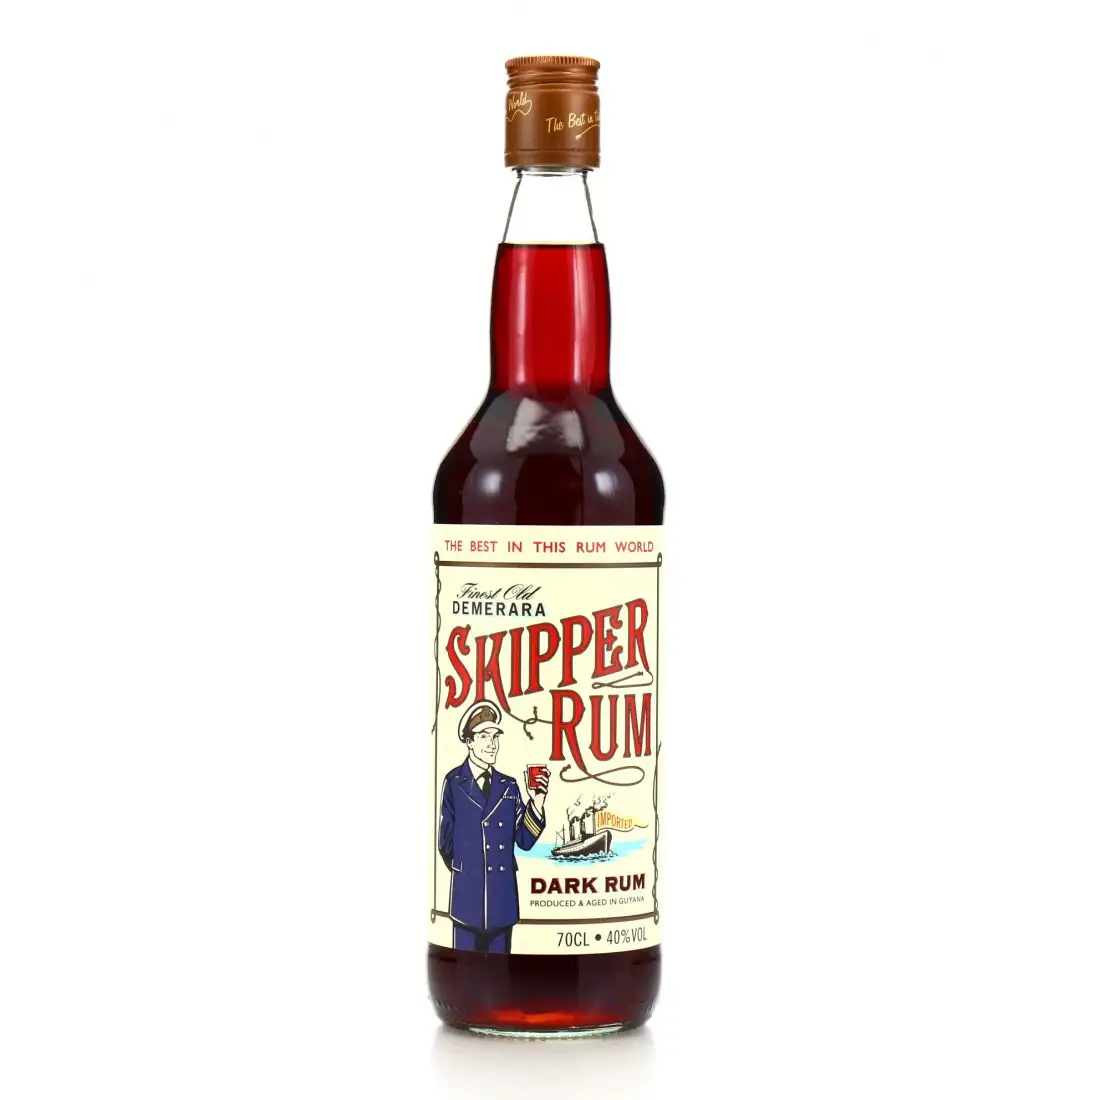 Image of the front of the bottle of the rum Skipper Dark Rum